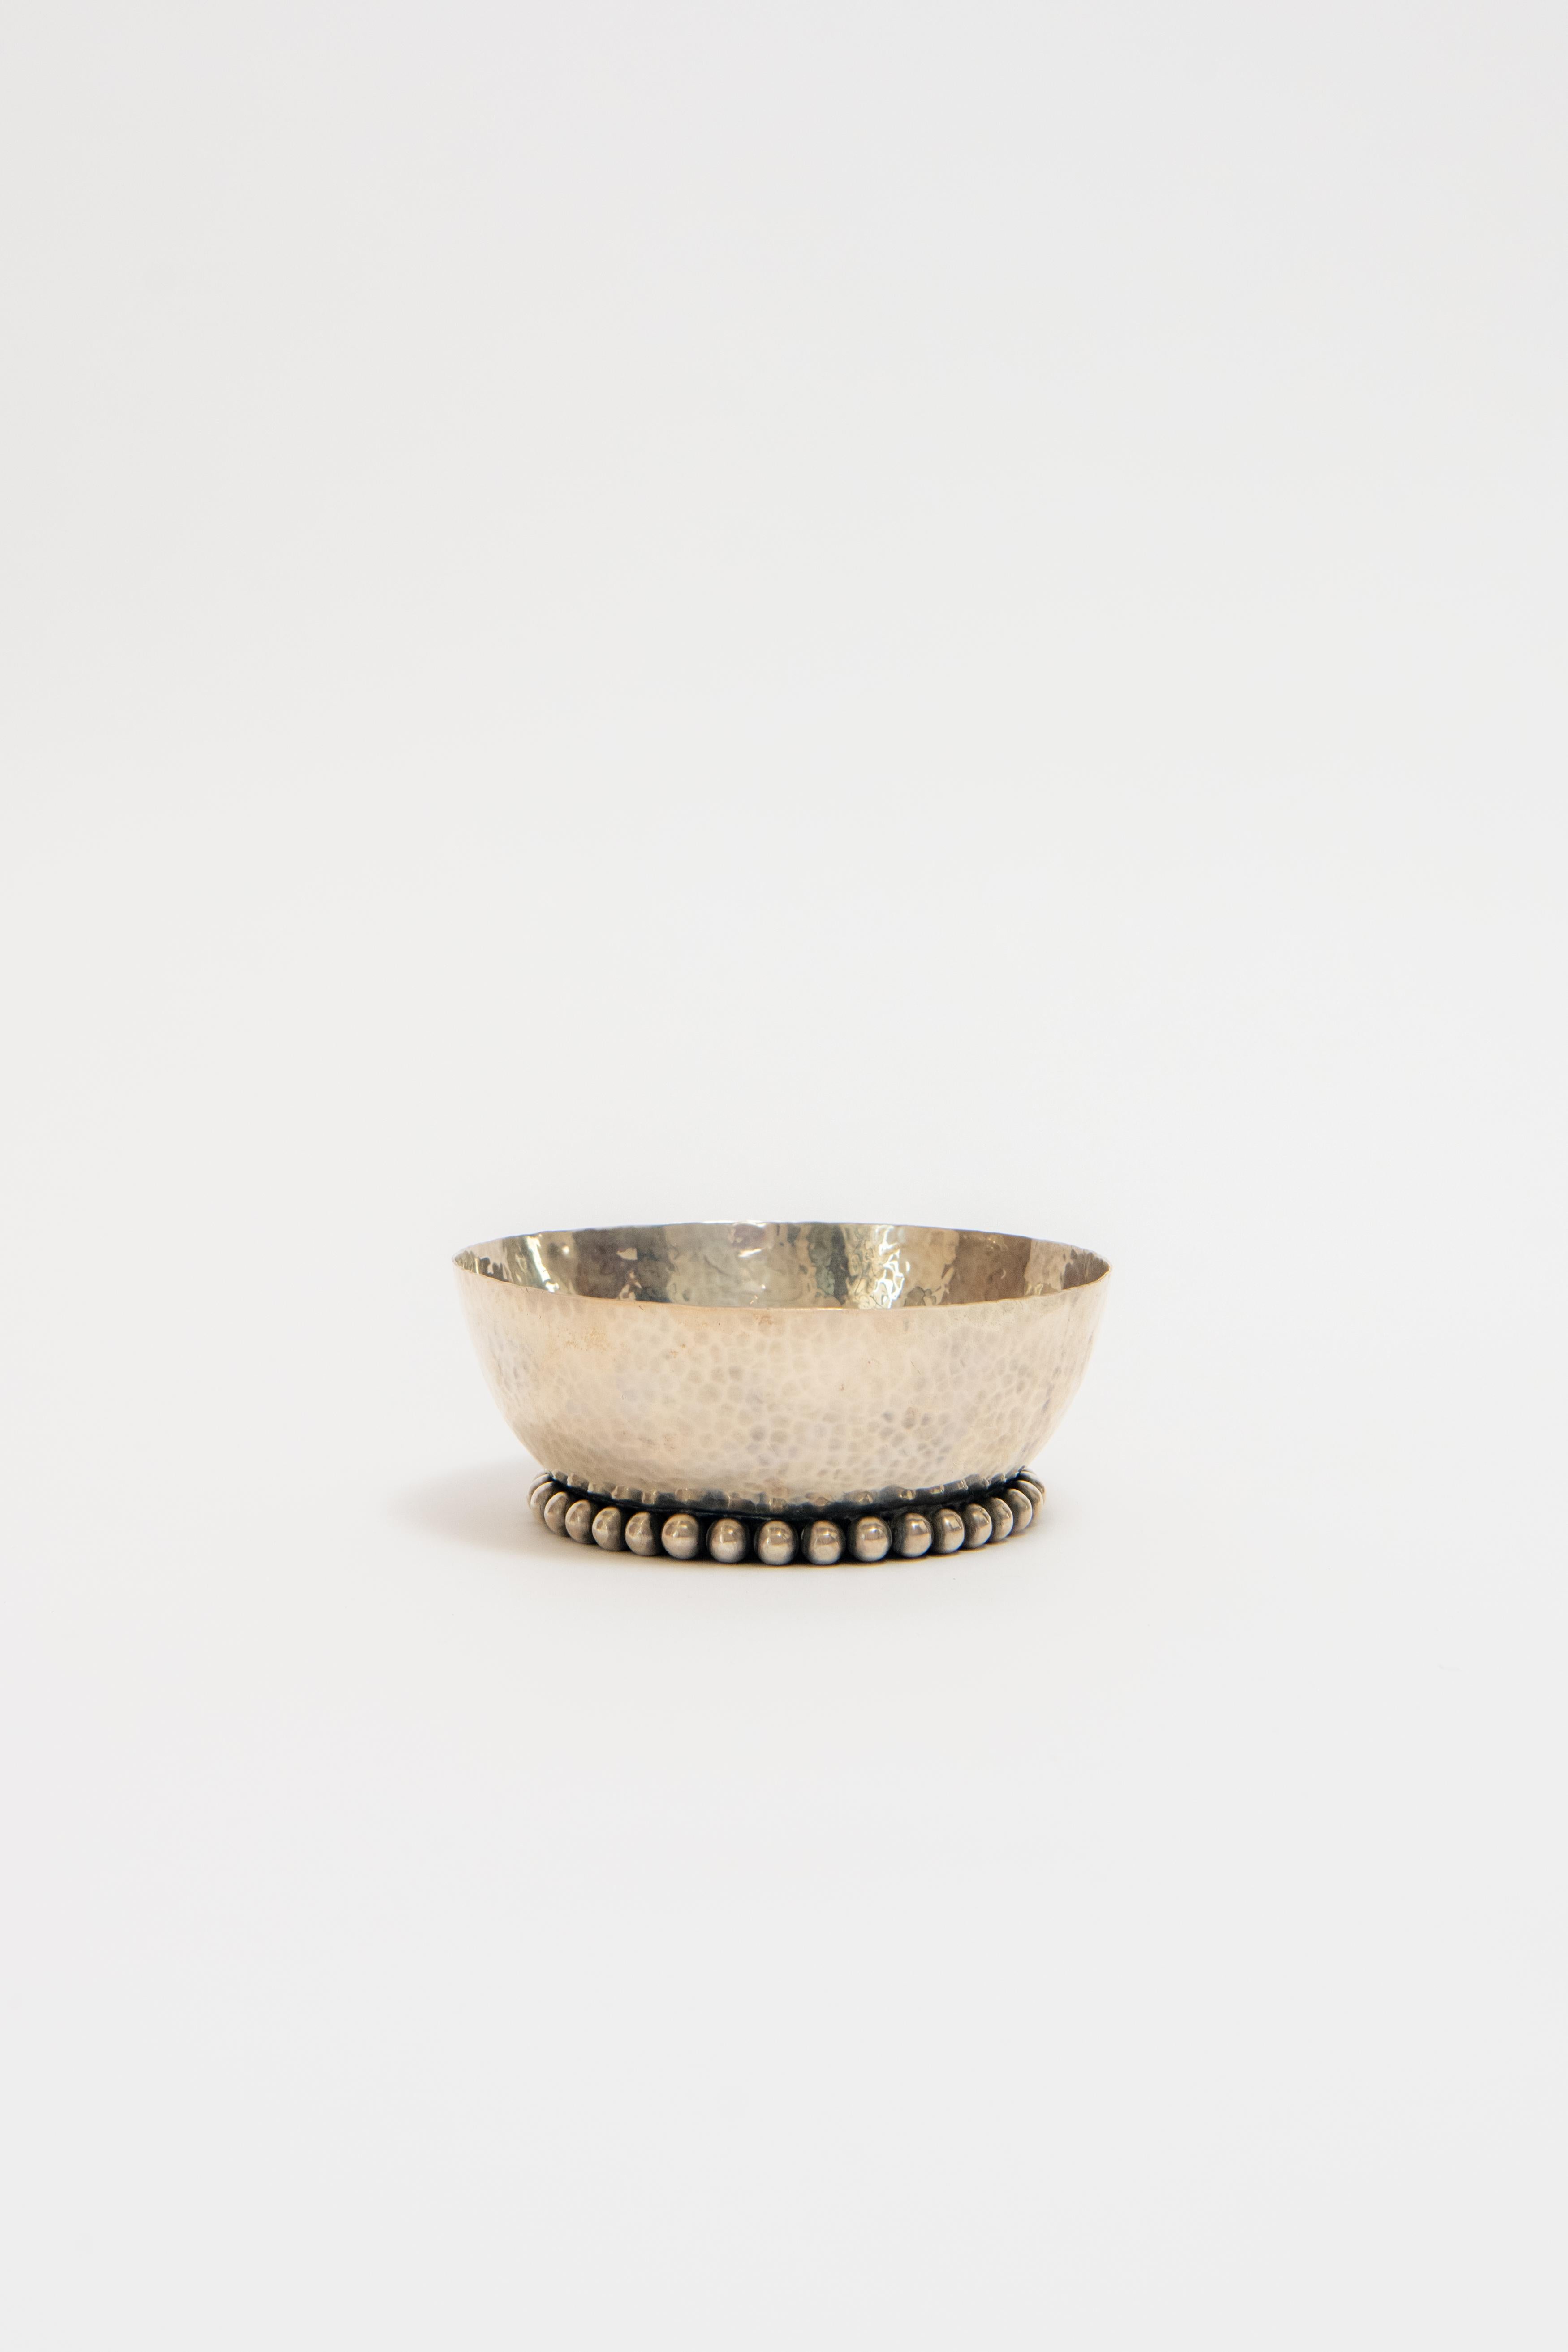 French Jean Déspres, Hammered Silver Bowl, c. 1930